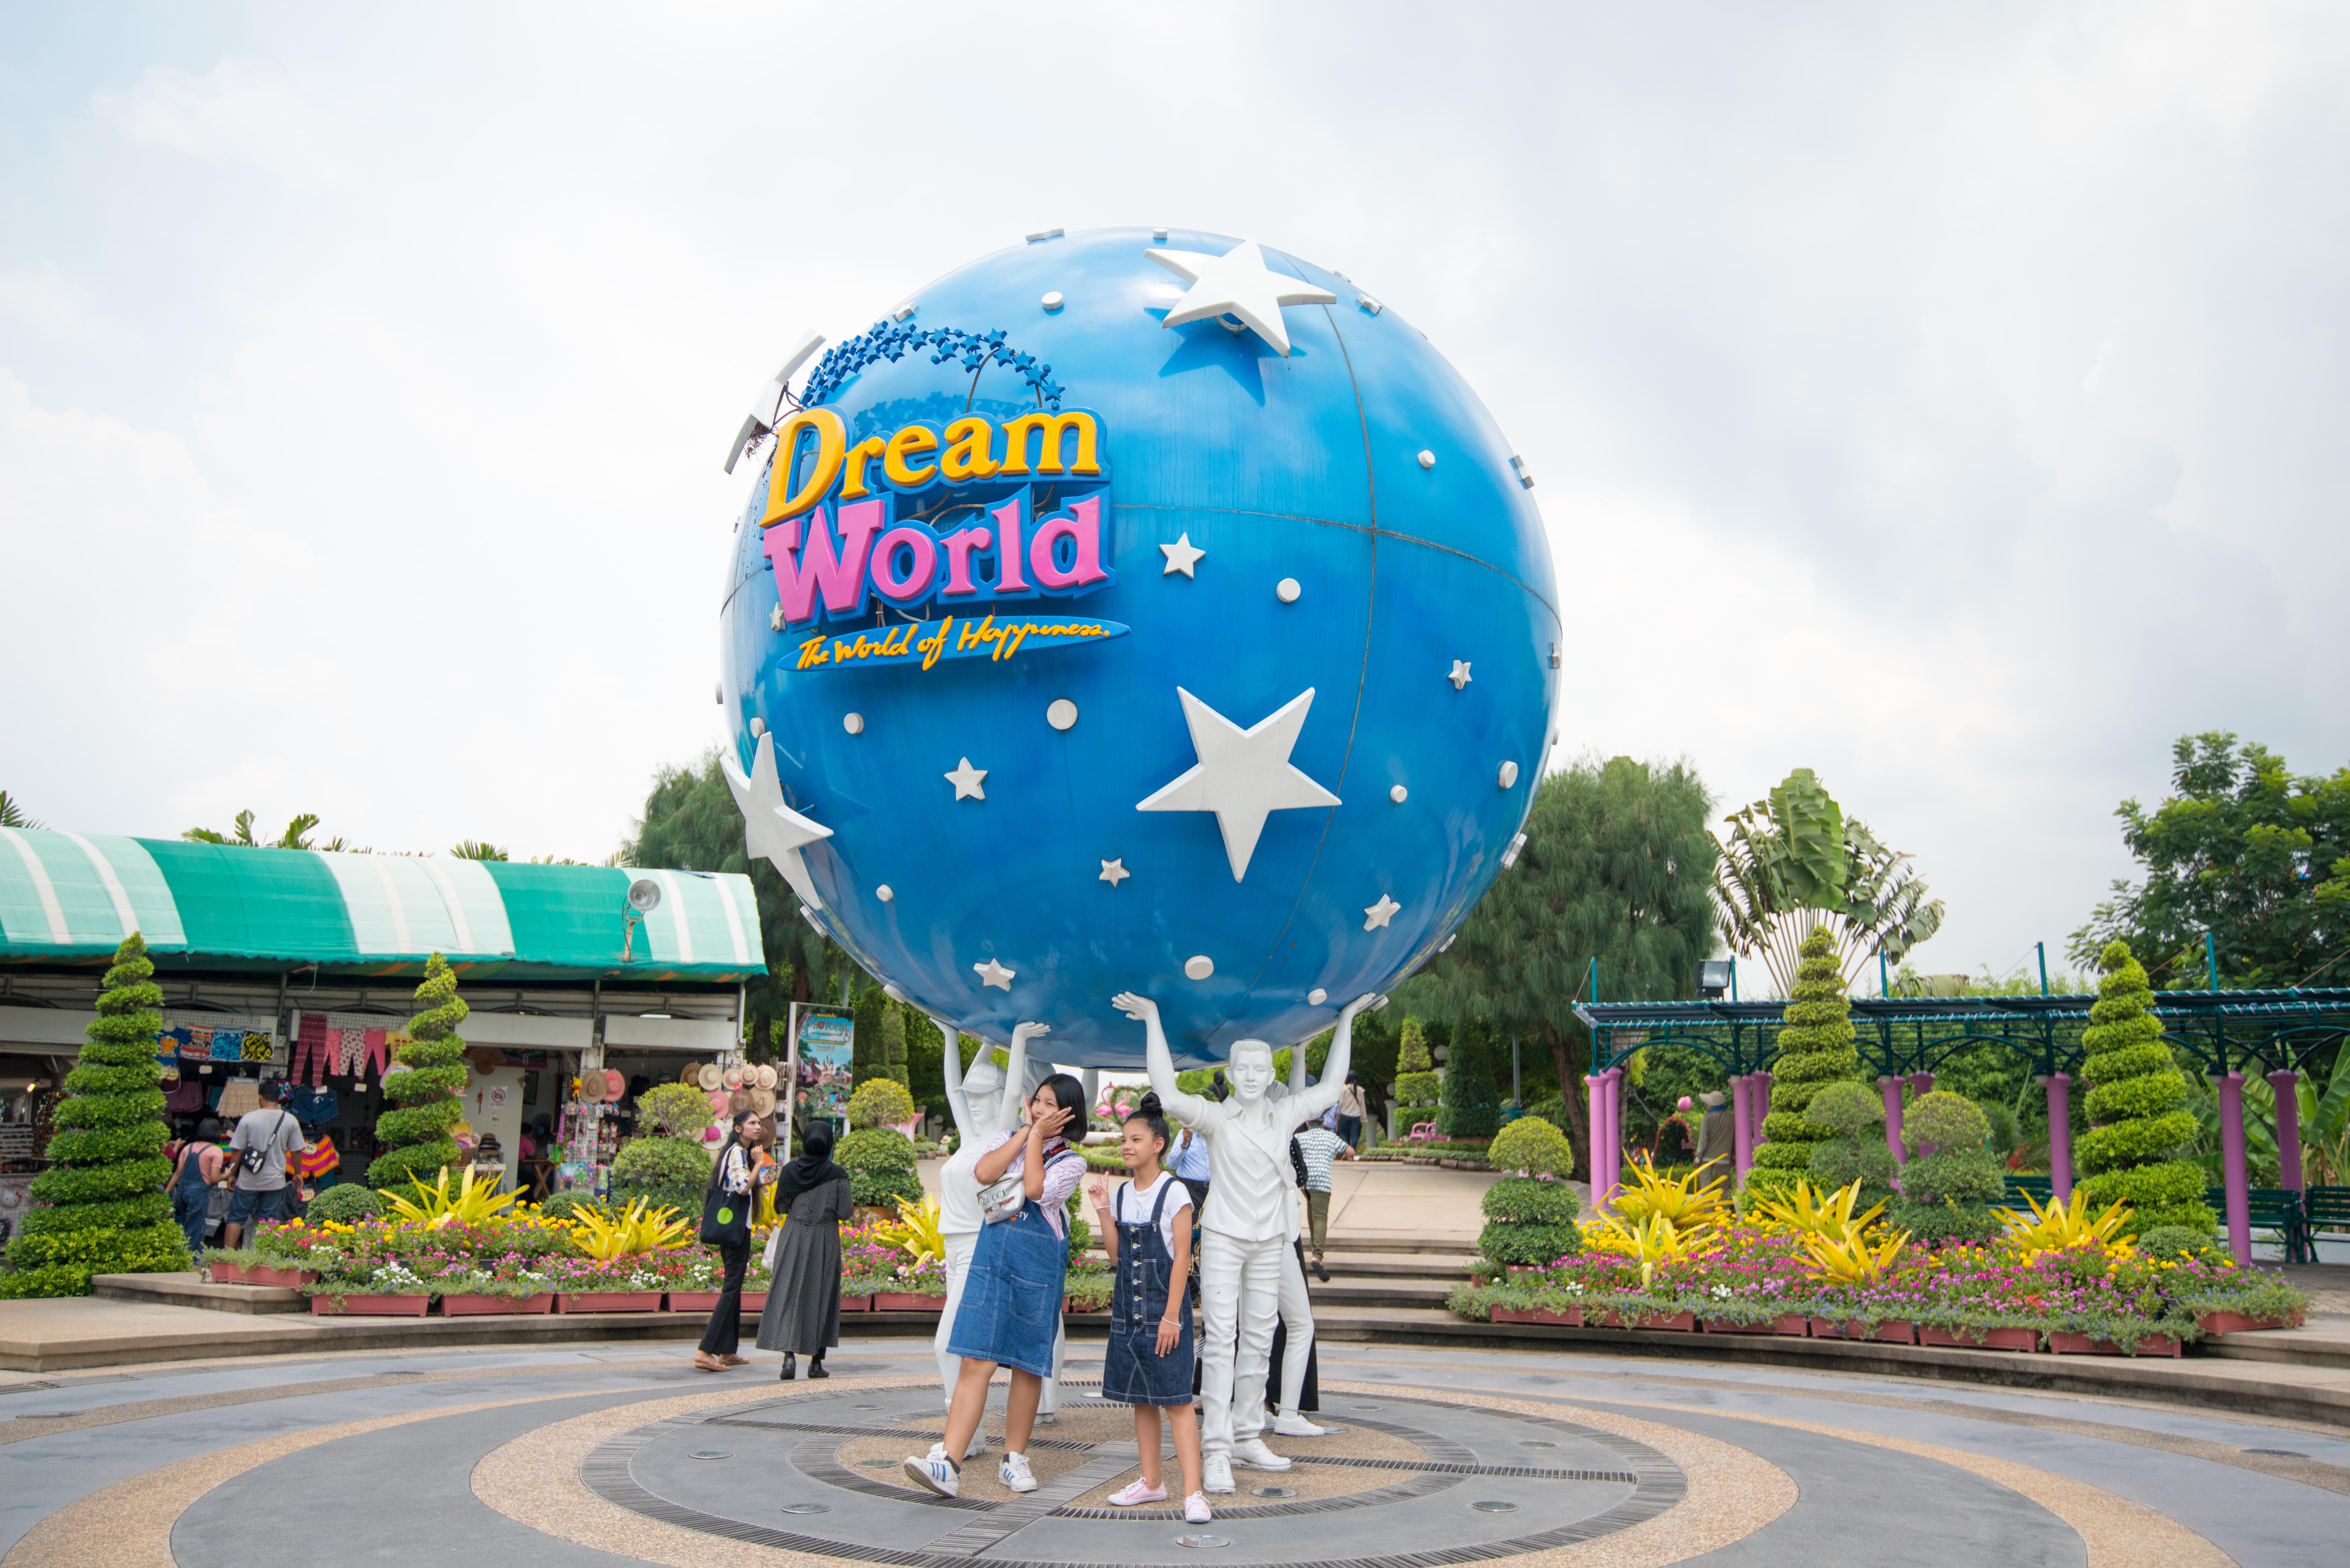 Dream world, Thailand @dreamworldth is about a 45 minutes drive